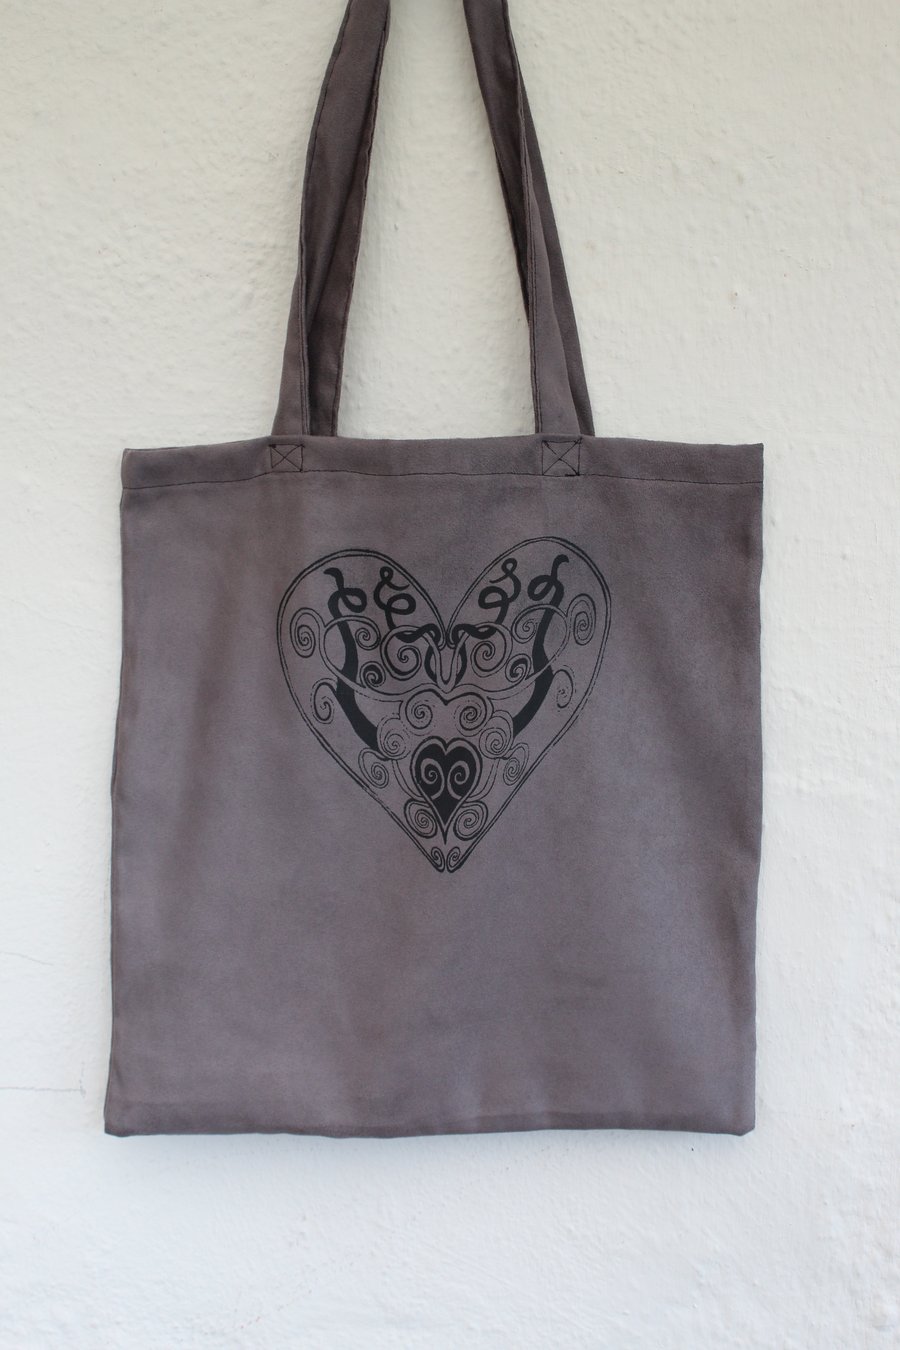 Handmade brown up cycled suede effect Tote bag,Heart screen print Bag,gift